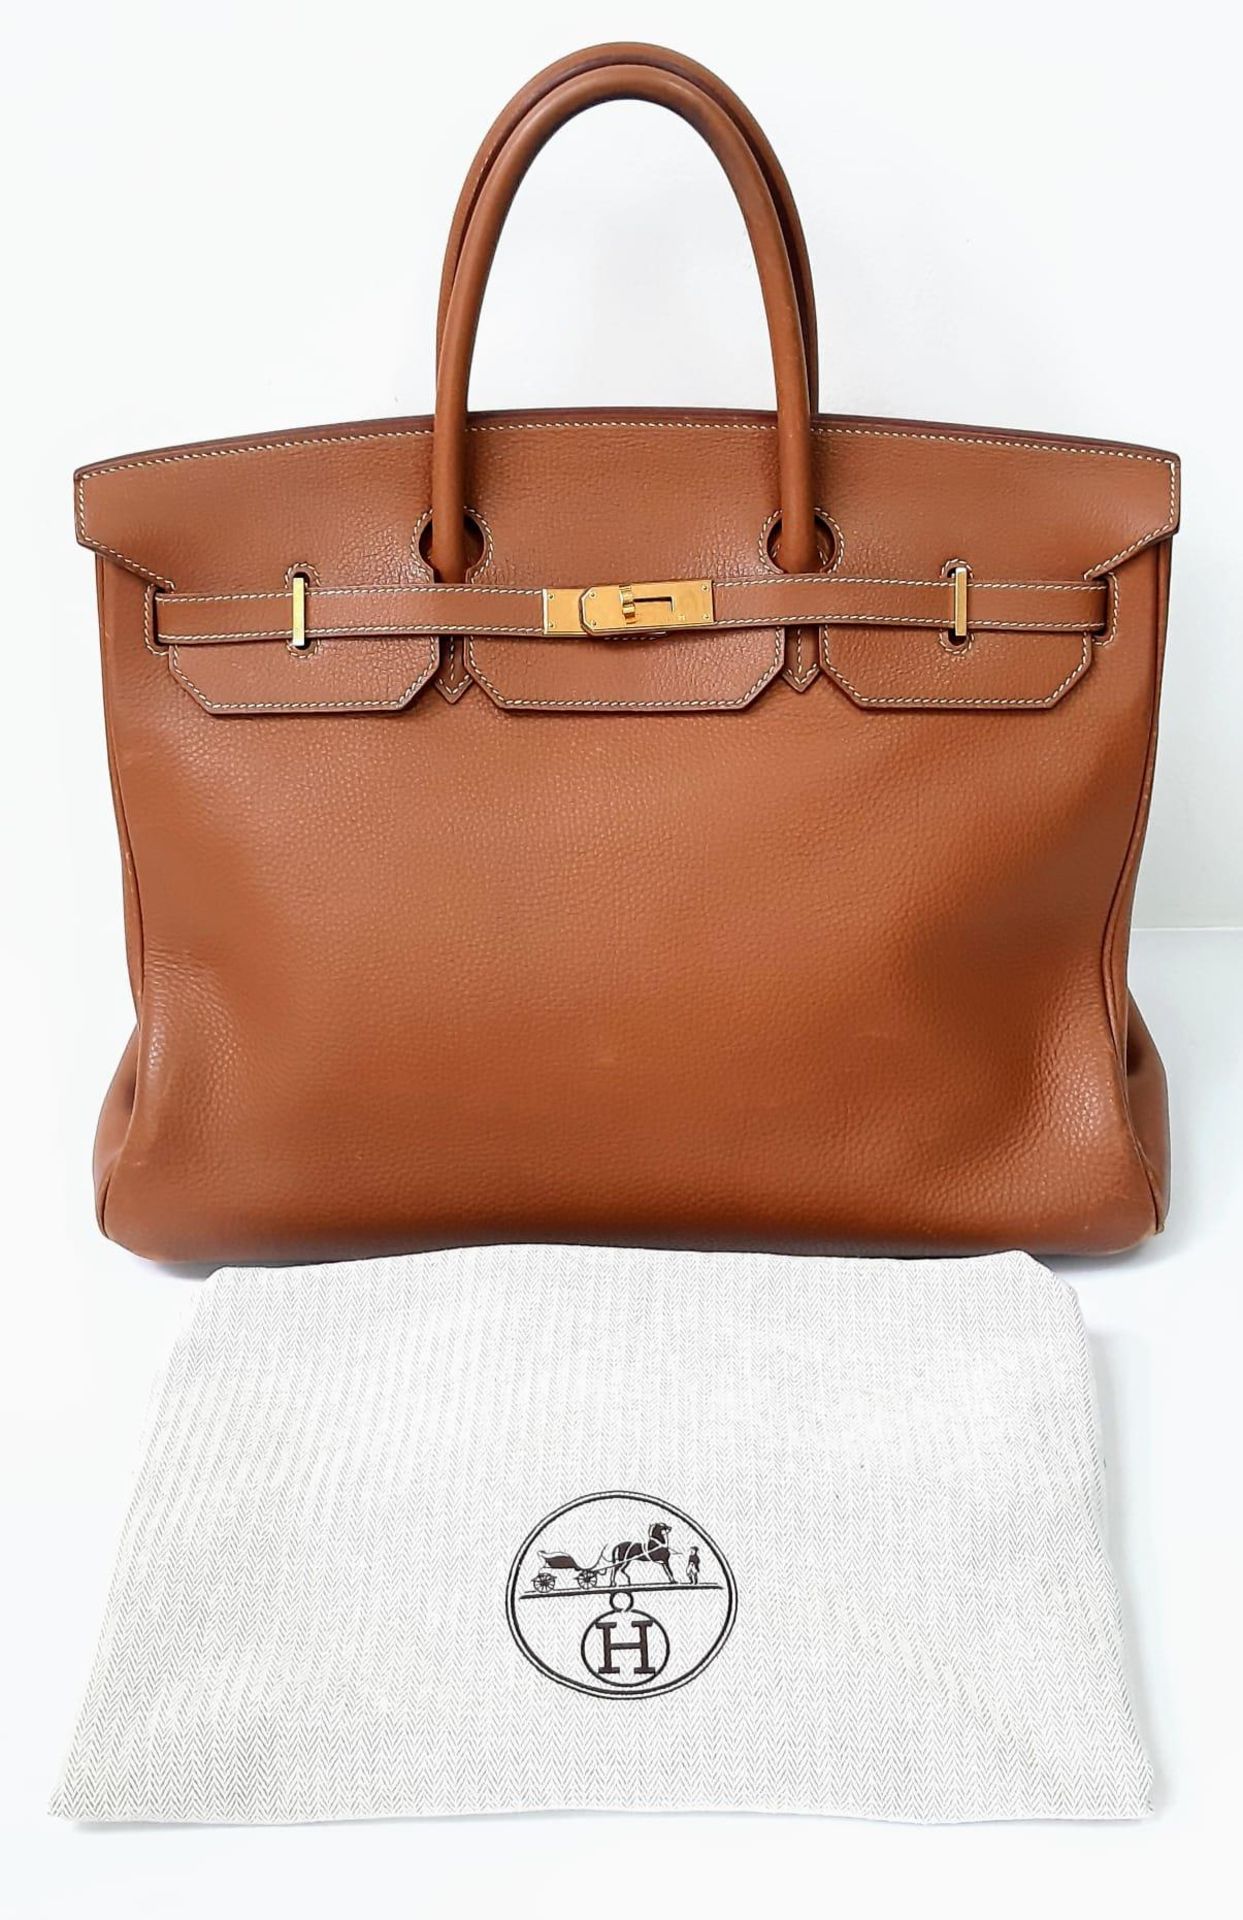 A Hermes Birkin Brown Leather Tote Bag. Handcrafted from the highest quality leather by skilled